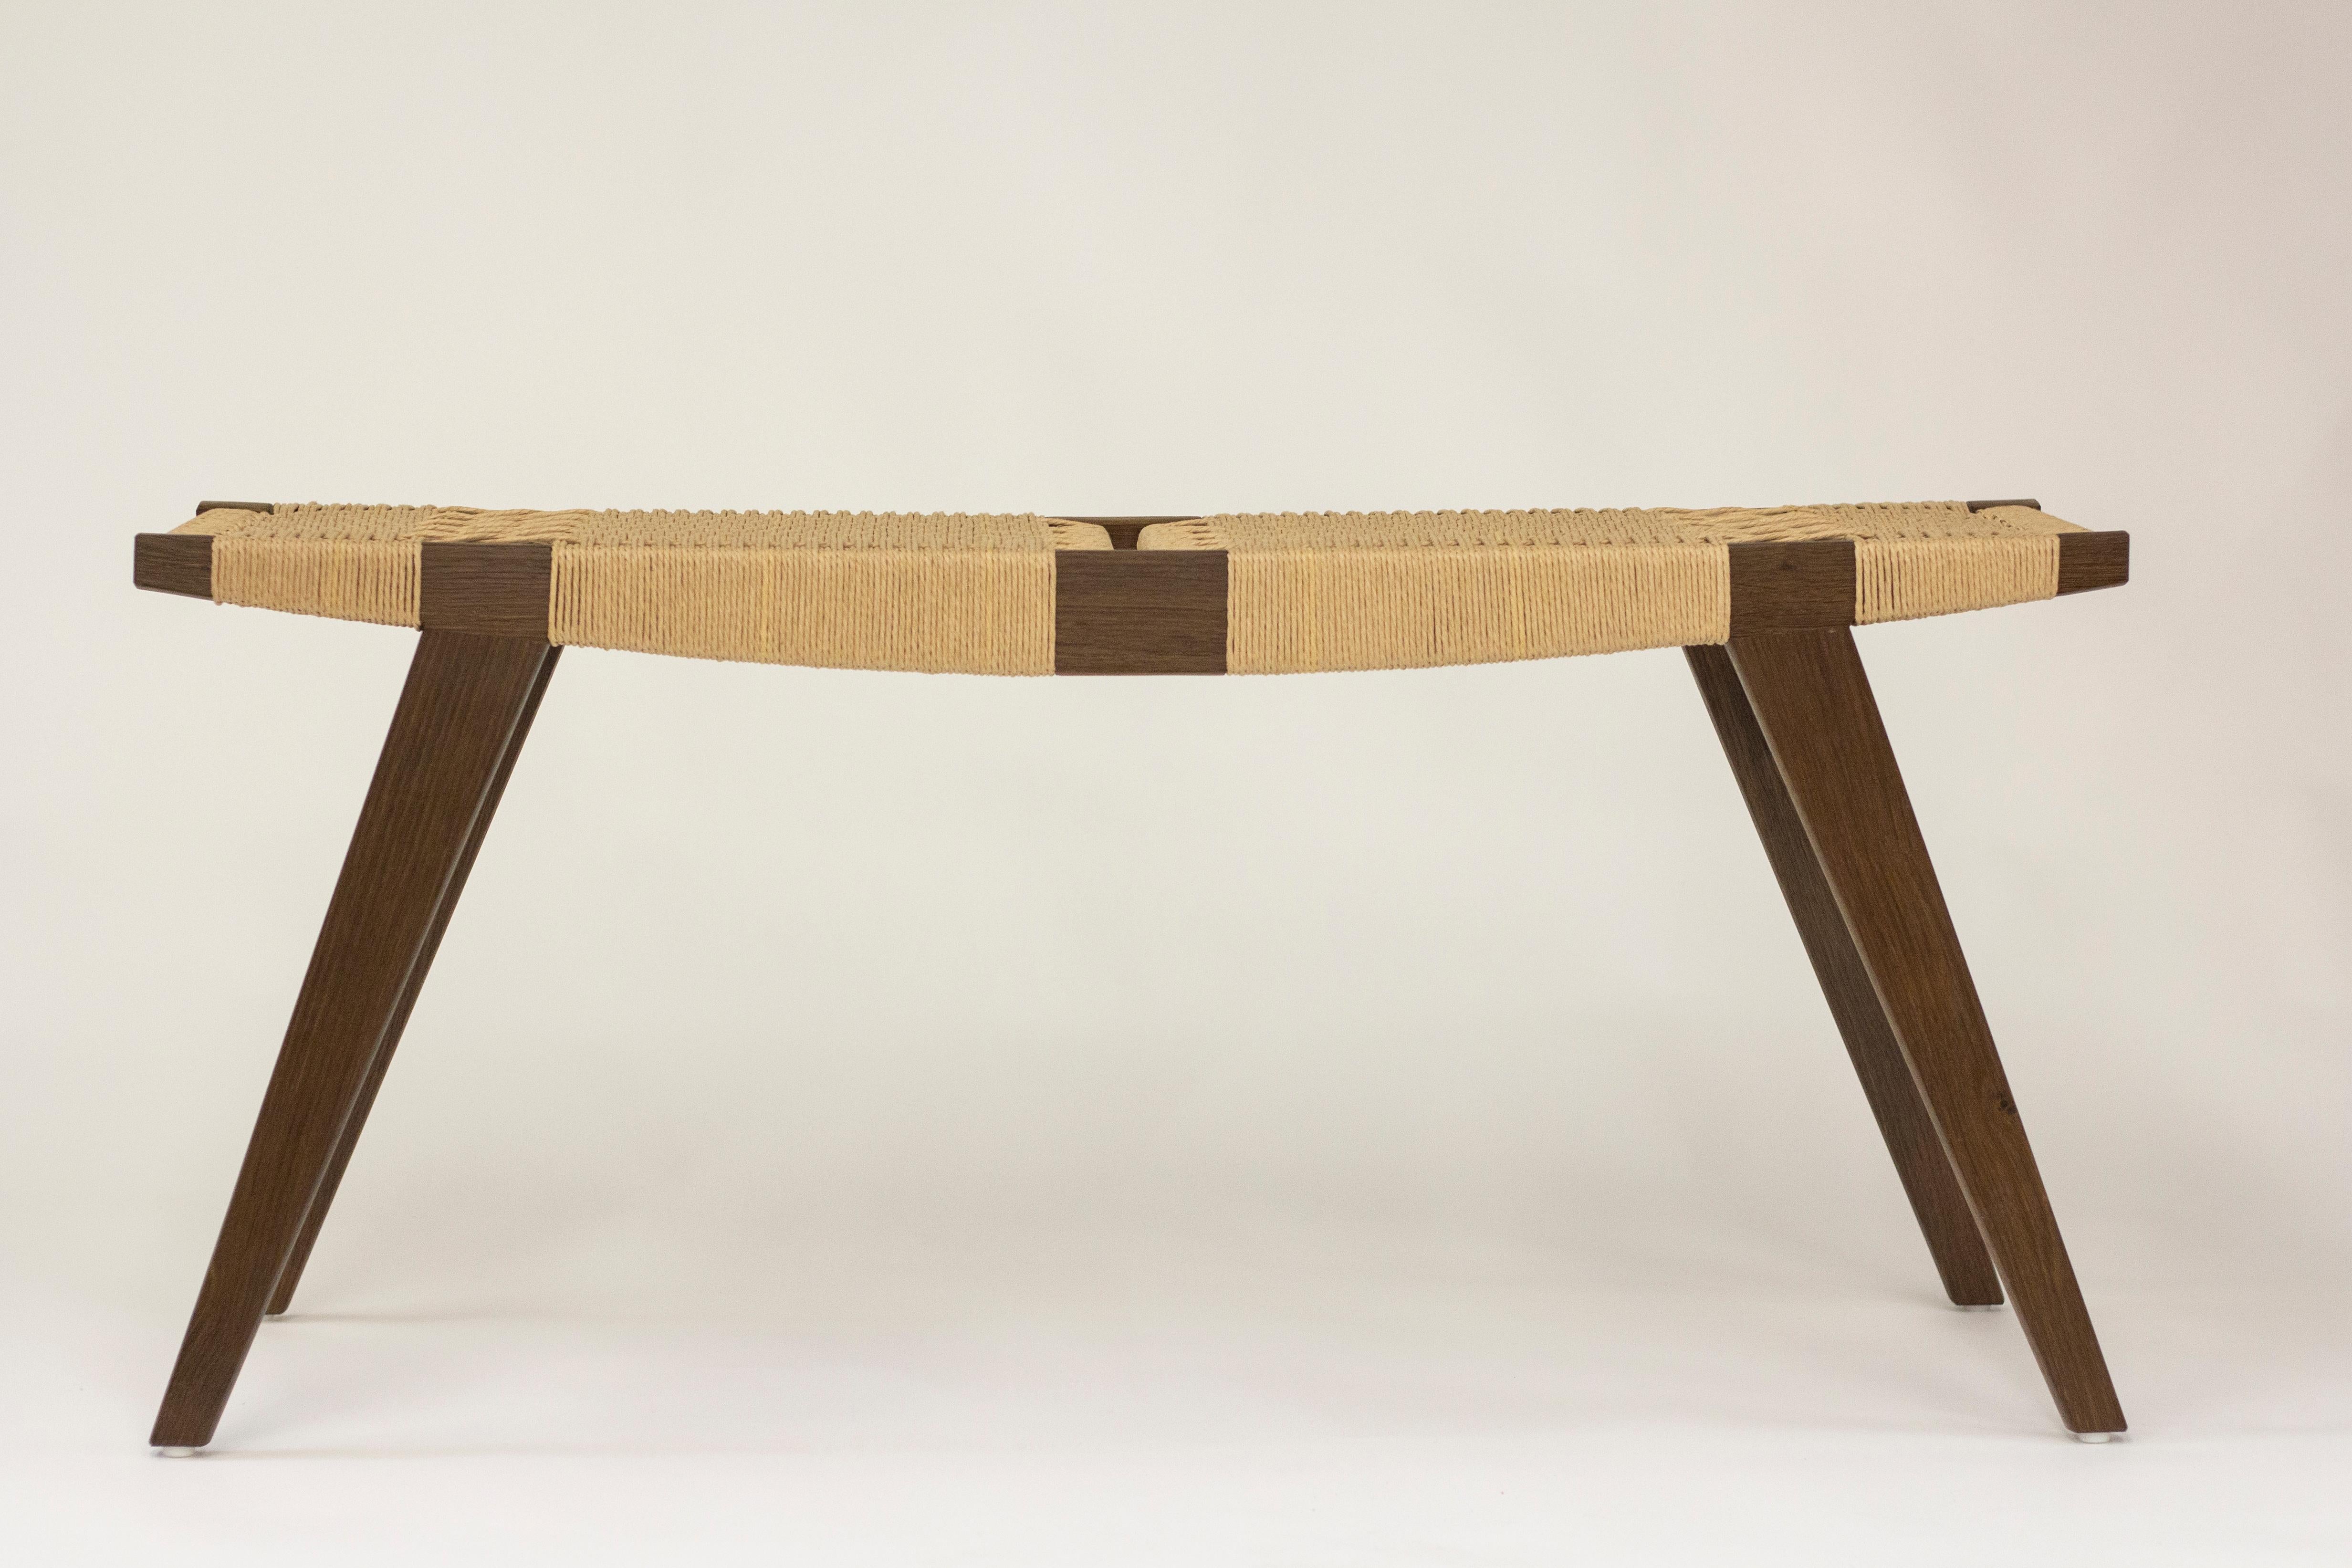 Contemporary bench in FSC British fumed oak with FSC natural Danish cord handwoven seat. Dimensions are approximately 120cm L x 44.3cm H x 33cm D. Available as a pair.

This set is ready made and available immediately, but can be made-to-order in